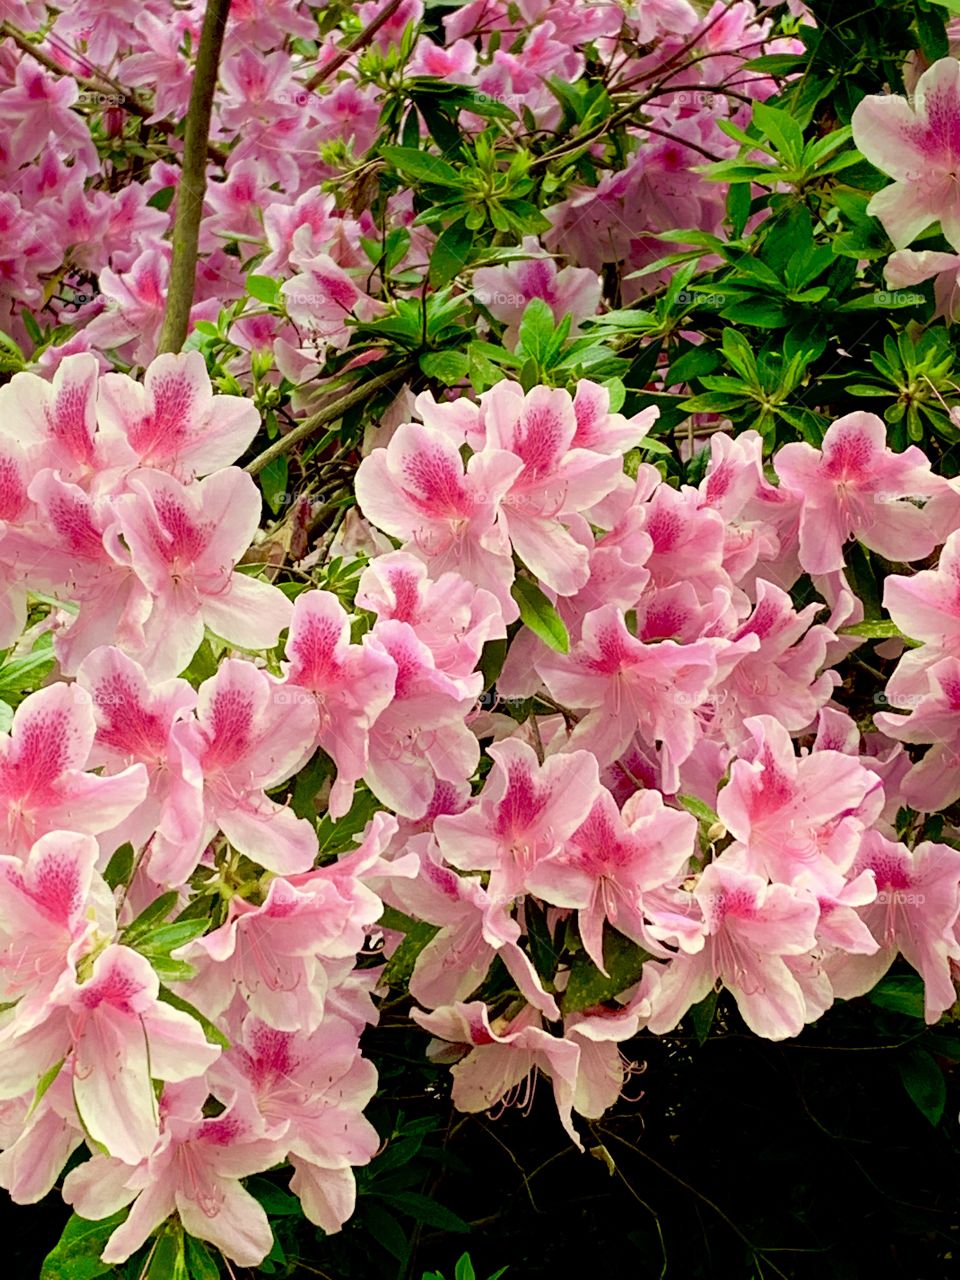 Some pretty pink flowers